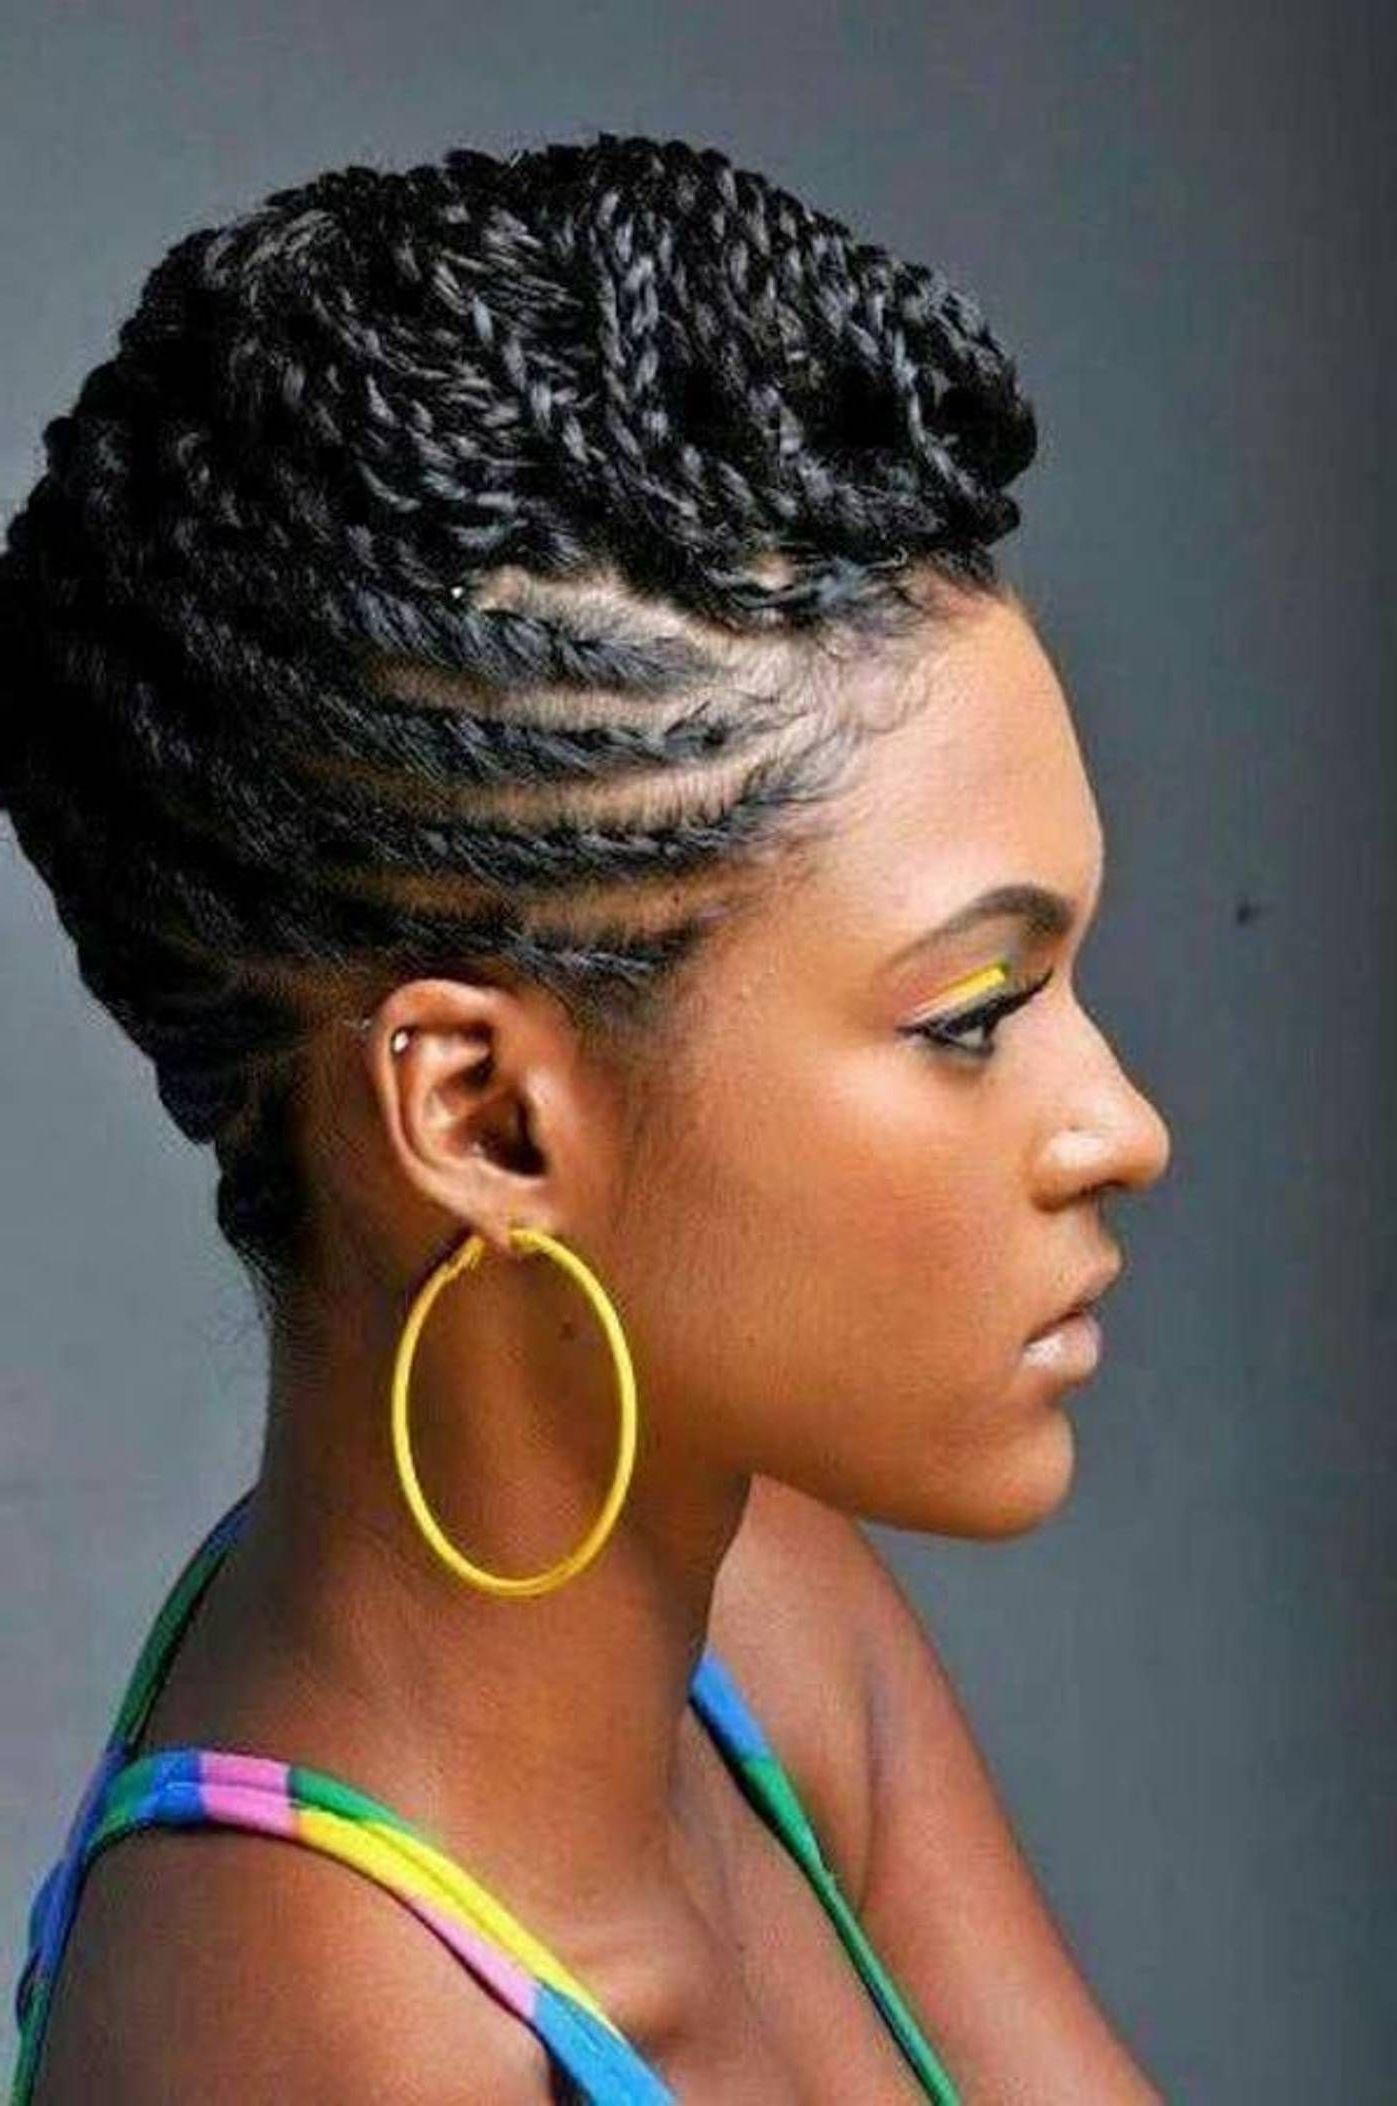 25 Updo Hairstyles For Black Women | Flat Twist Hairstyles, Twist Throughout African Hair Updo Hairstyles (View 1 of 15)